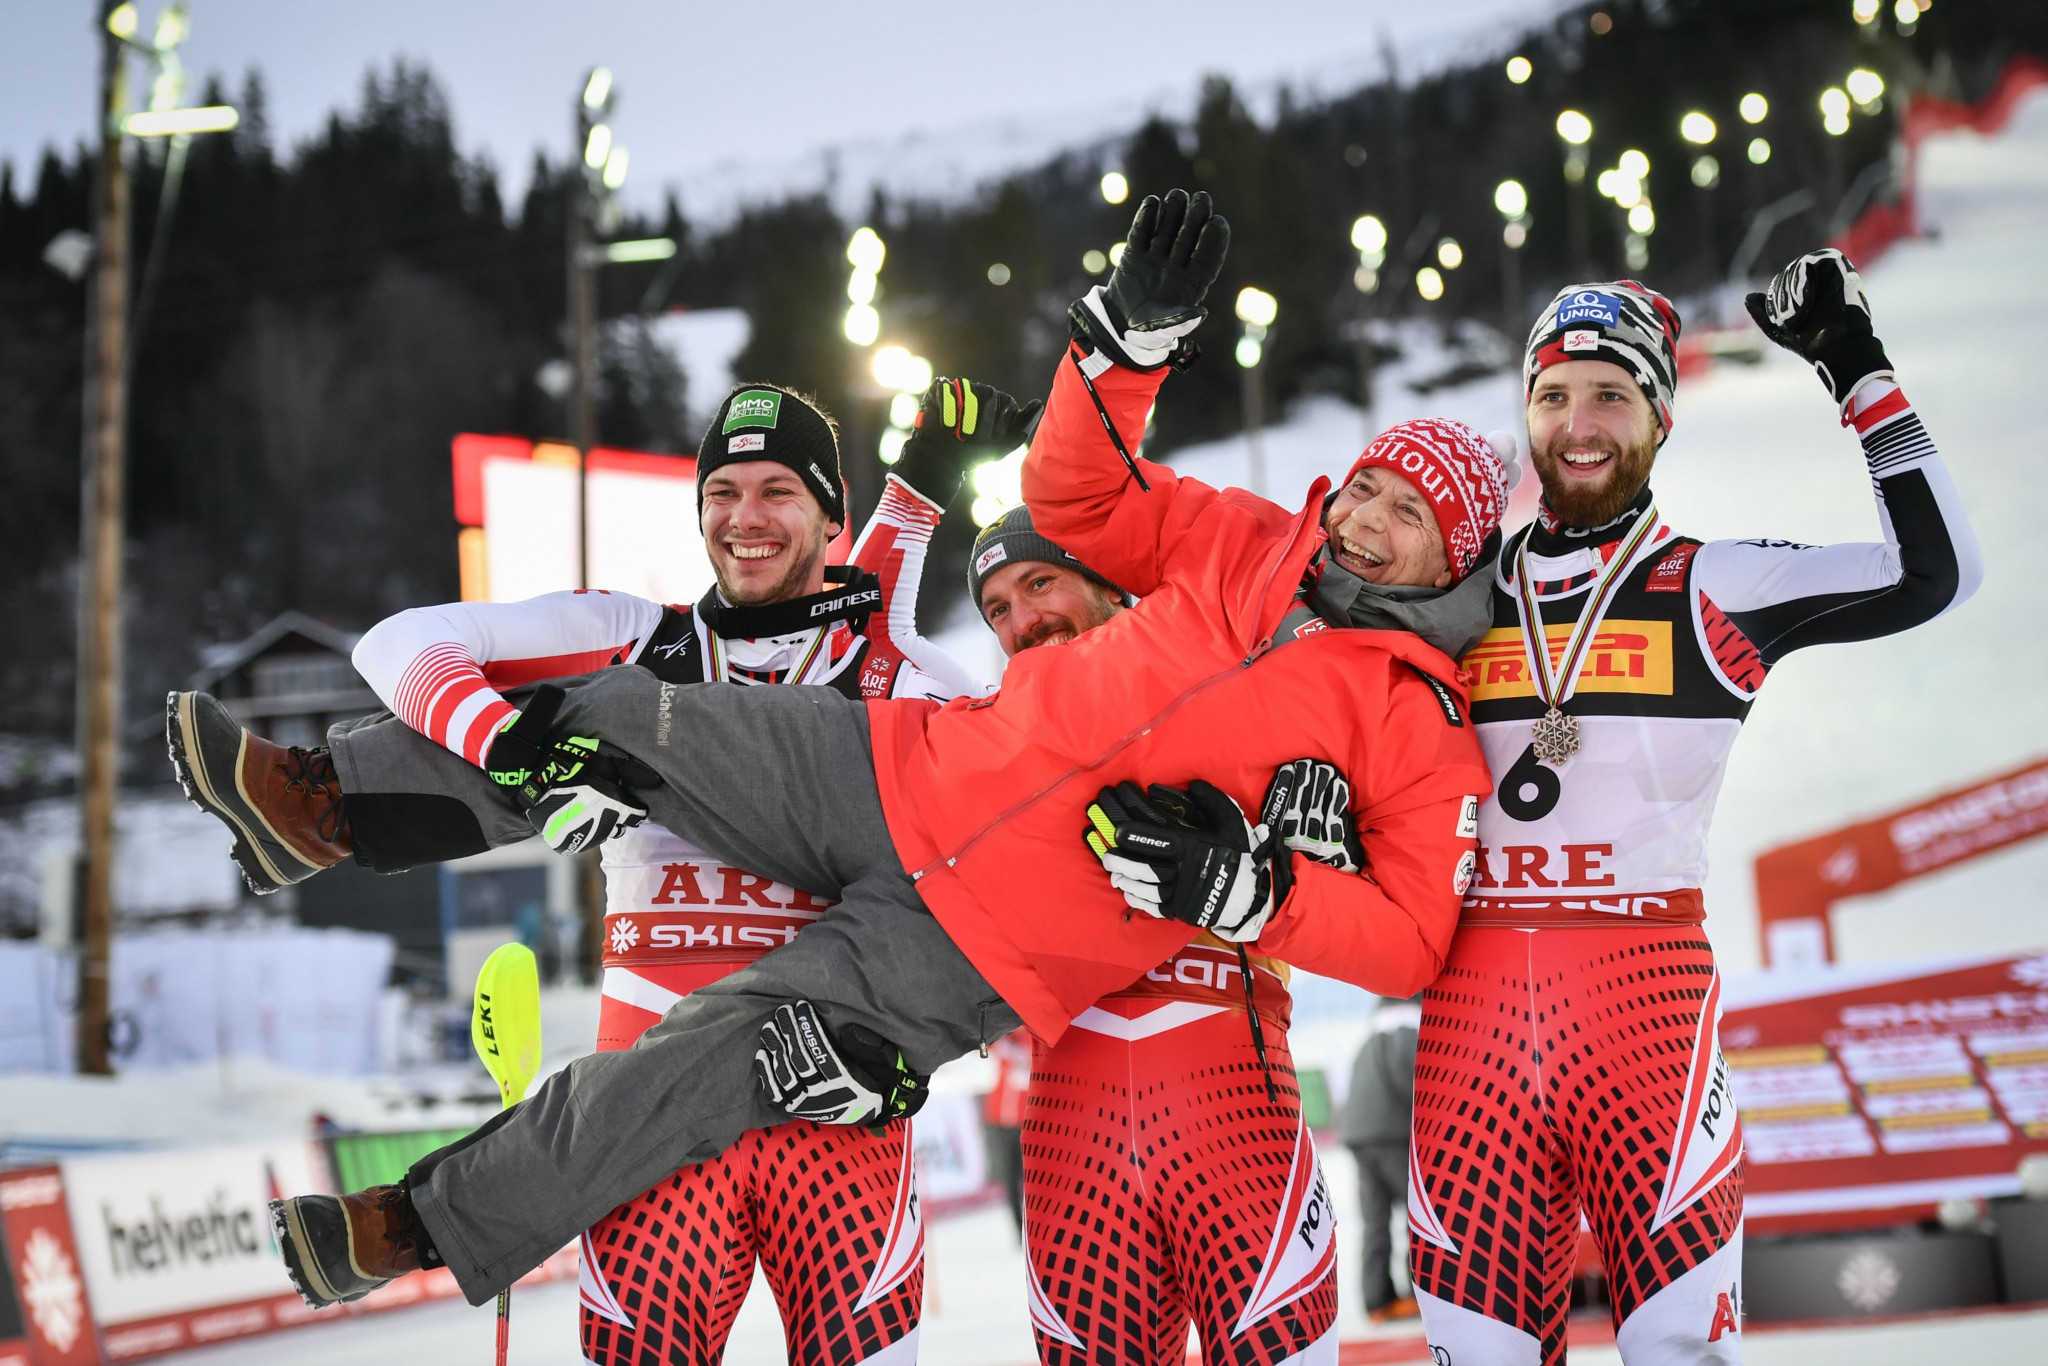 The Austrian team were left celebrating a successful final day following their podium sweep ©Getty Images